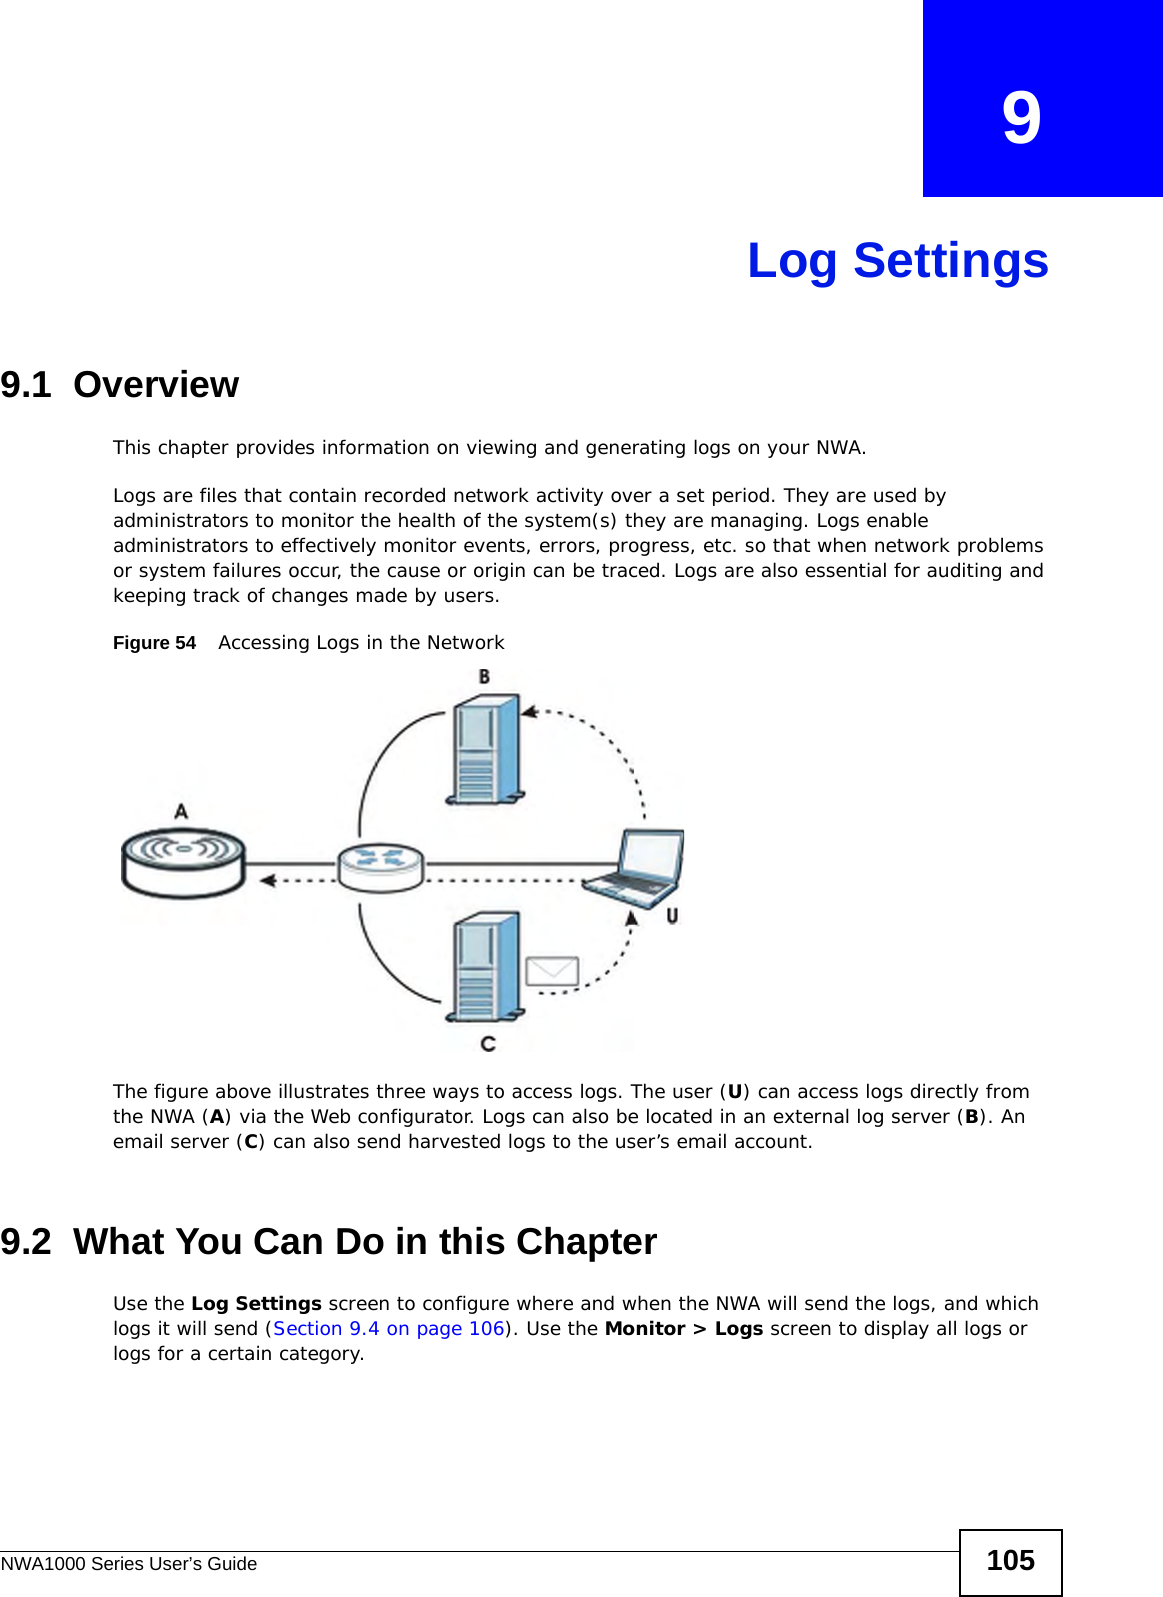 NWA1000 Series User’s Guide 105CHAPTER   9Log Settings9.1  OverviewThis chapter provides information on viewing and generating logs on your NWA.Logs are files that contain recorded network activity over a set period. They are used by administrators to monitor the health of the system(s) they are managing. Logs enable administrators to effectively monitor events, errors, progress, etc. so that when network problems or system failures occur, the cause or origin can be traced. Logs are also essential for auditing and keeping track of changes made by users. Figure 54    Accessing Logs in the NetworkThe figure above illustrates three ways to access logs. The user (U) can access logs directly from the NWA (A) via the Web configurator. Logs can also be located in an external log server (B). An email server (C) can also send harvested logs to the user’s email account. 9.2  What You Can Do in this ChapterUse the Log Settings screen to configure where and when the NWA will send the logs, and which logs it will send (Section 9.4 on page 106). Use the Monitor &gt; Logs screen to display all logs or logs for a certain category.